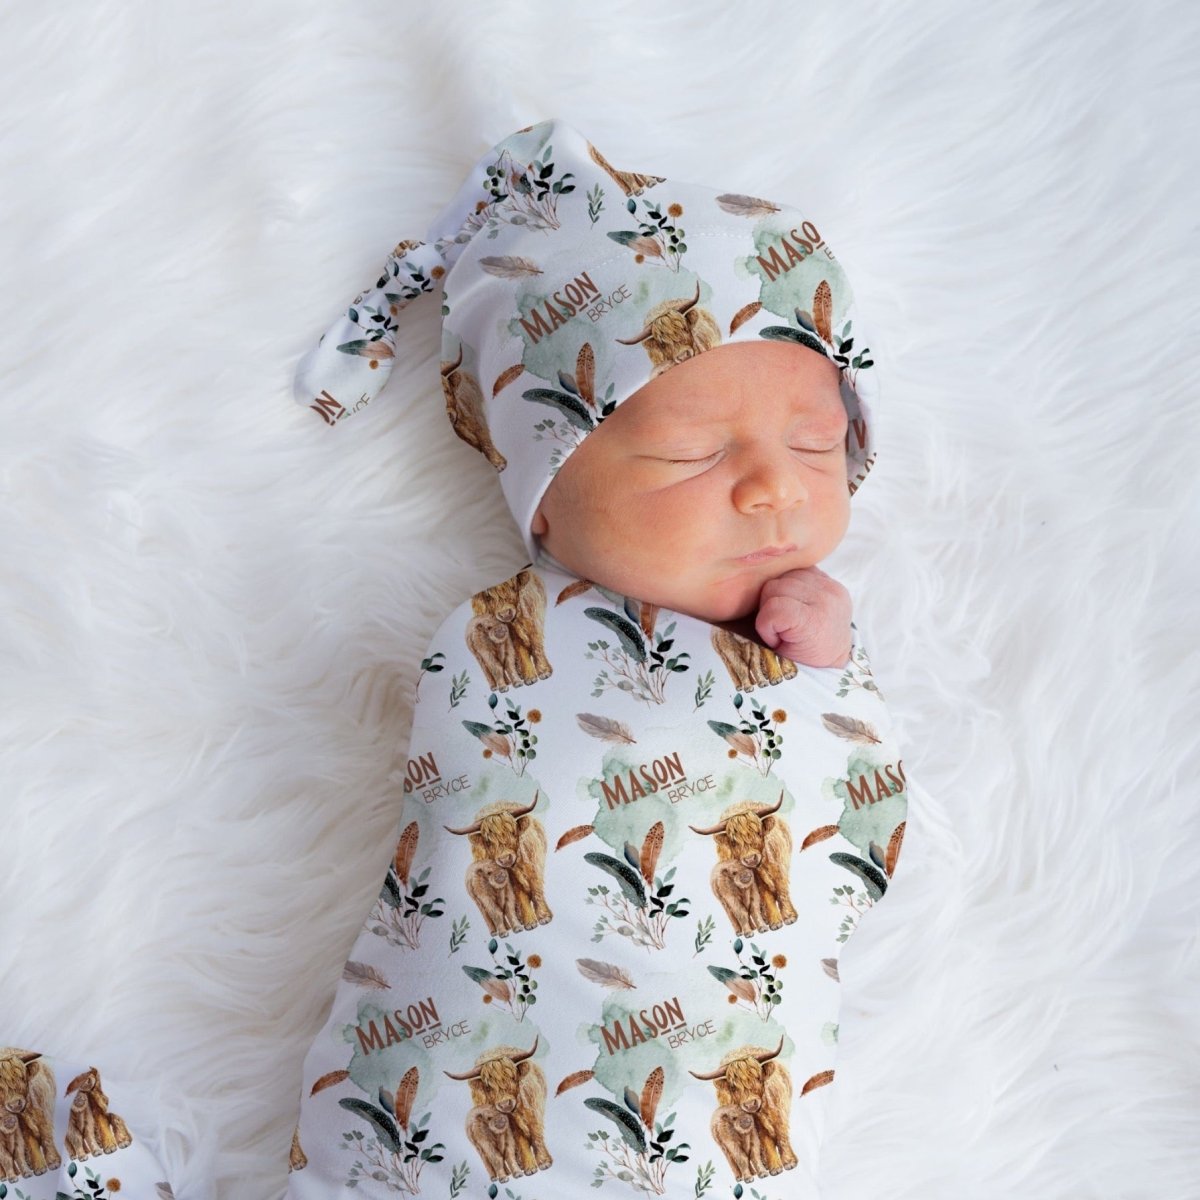 Highland Cow Feathers Personalized Swaddle Blanket Set - gender_boy, Highland Cow Feathers, text